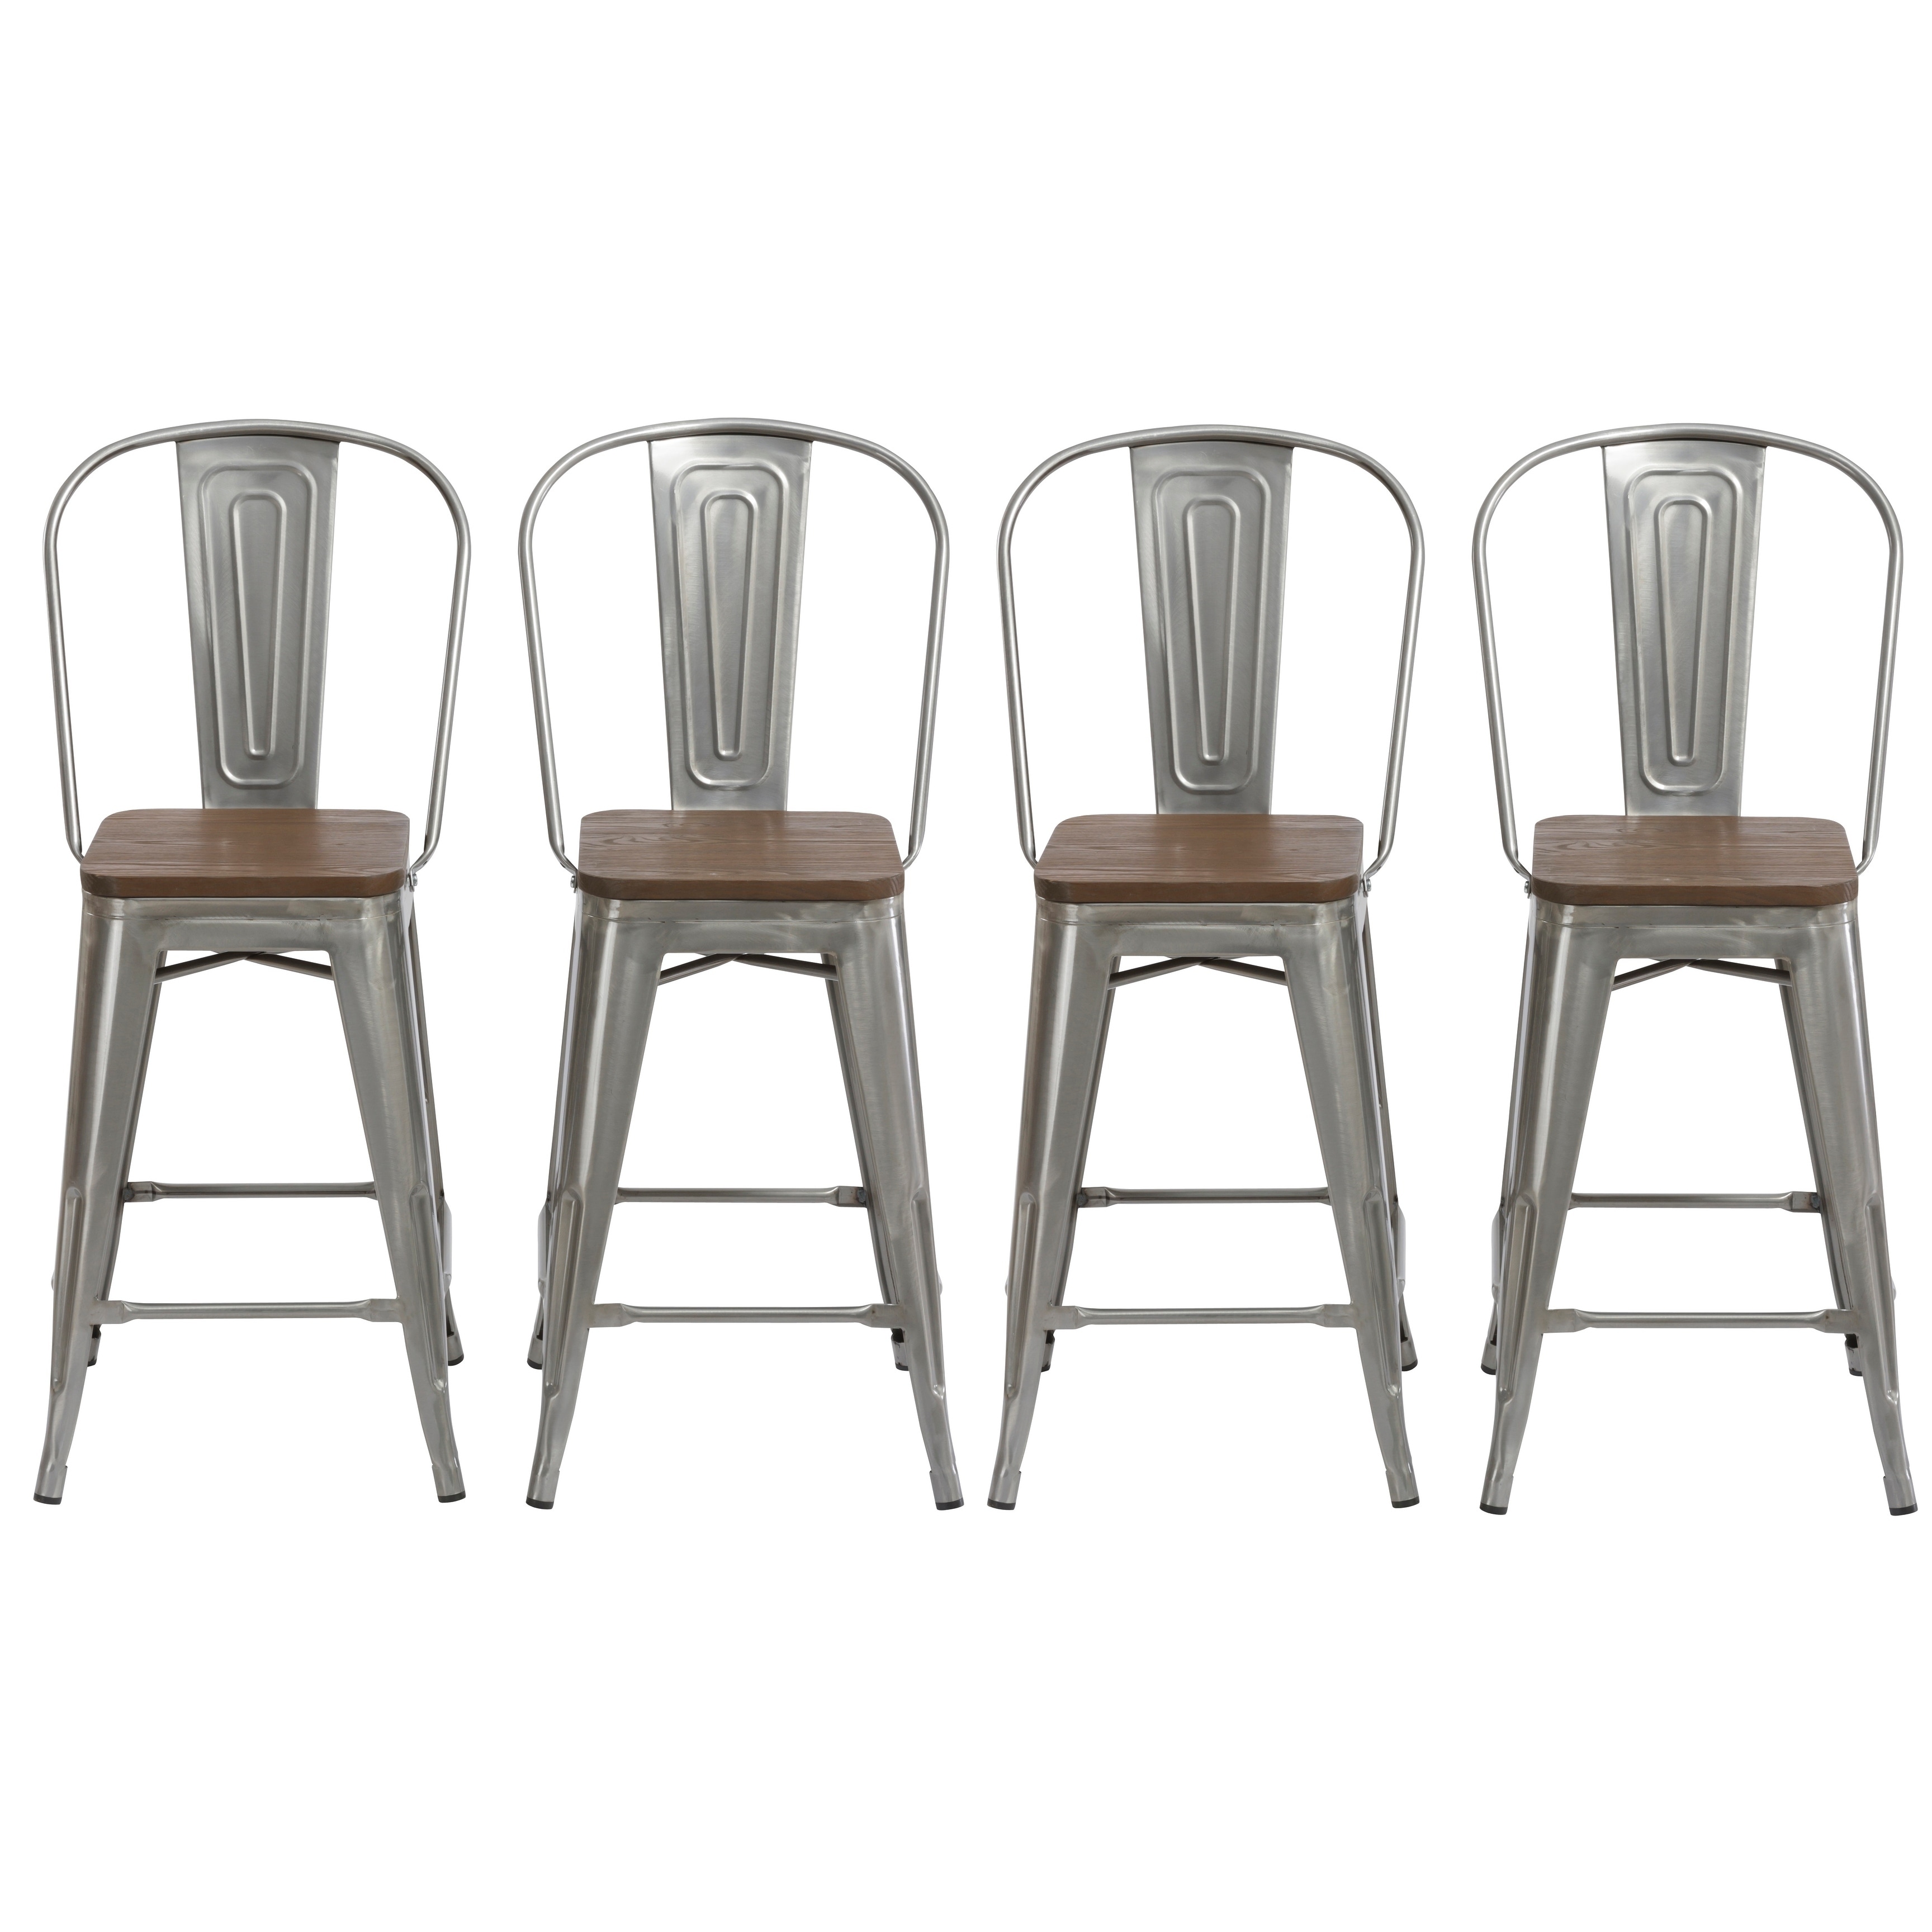 antique distressed steel wood 24" high back chair bar stool set of 4  barstools